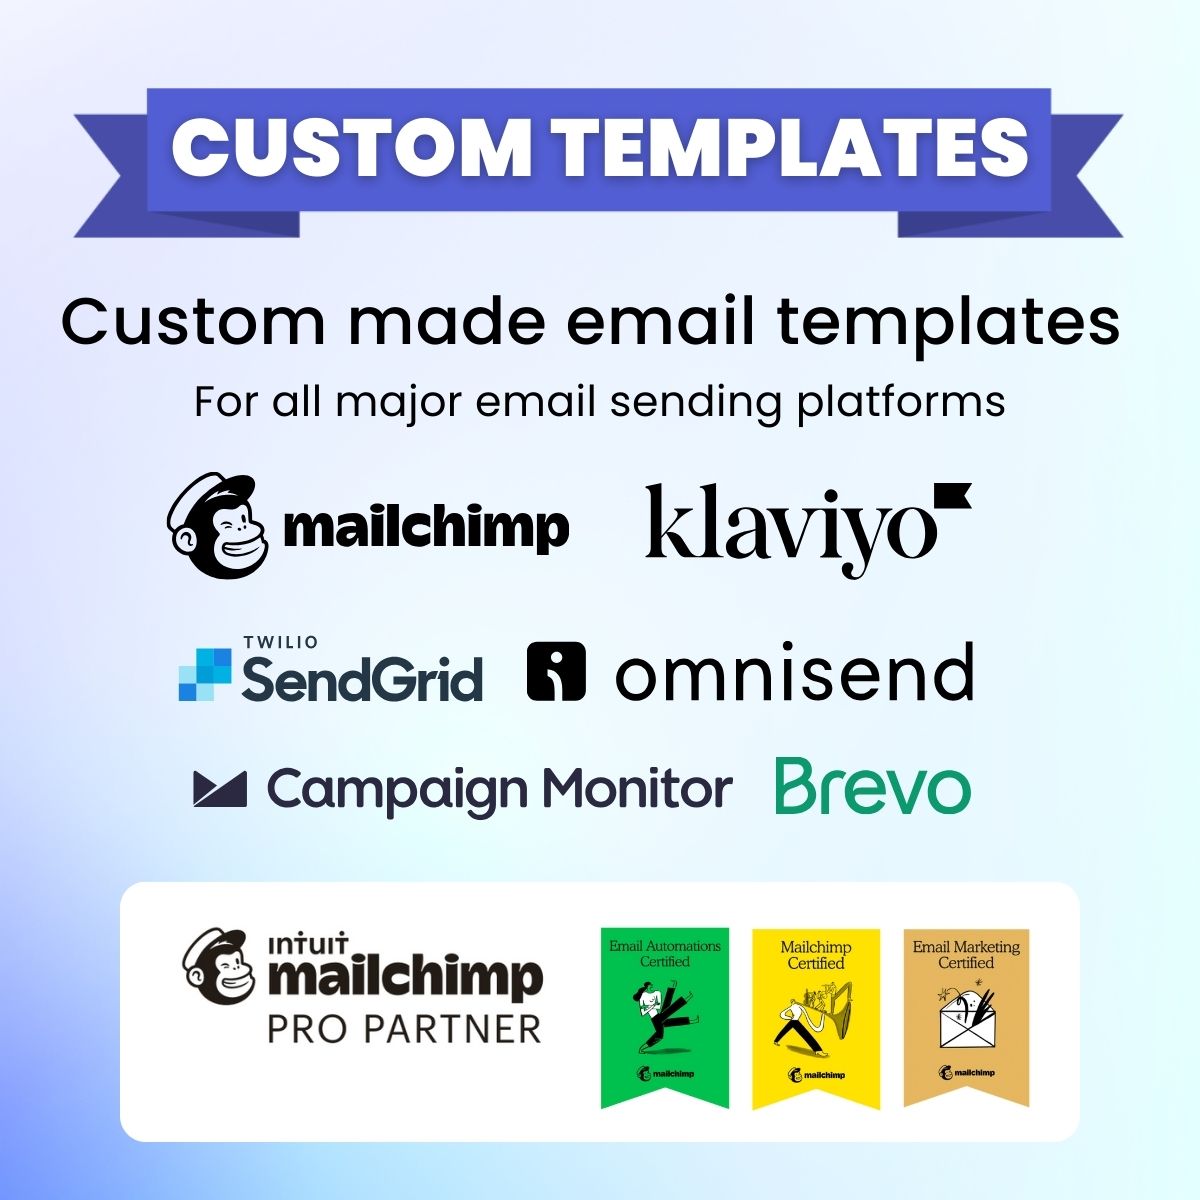 Custom Made Email Templates